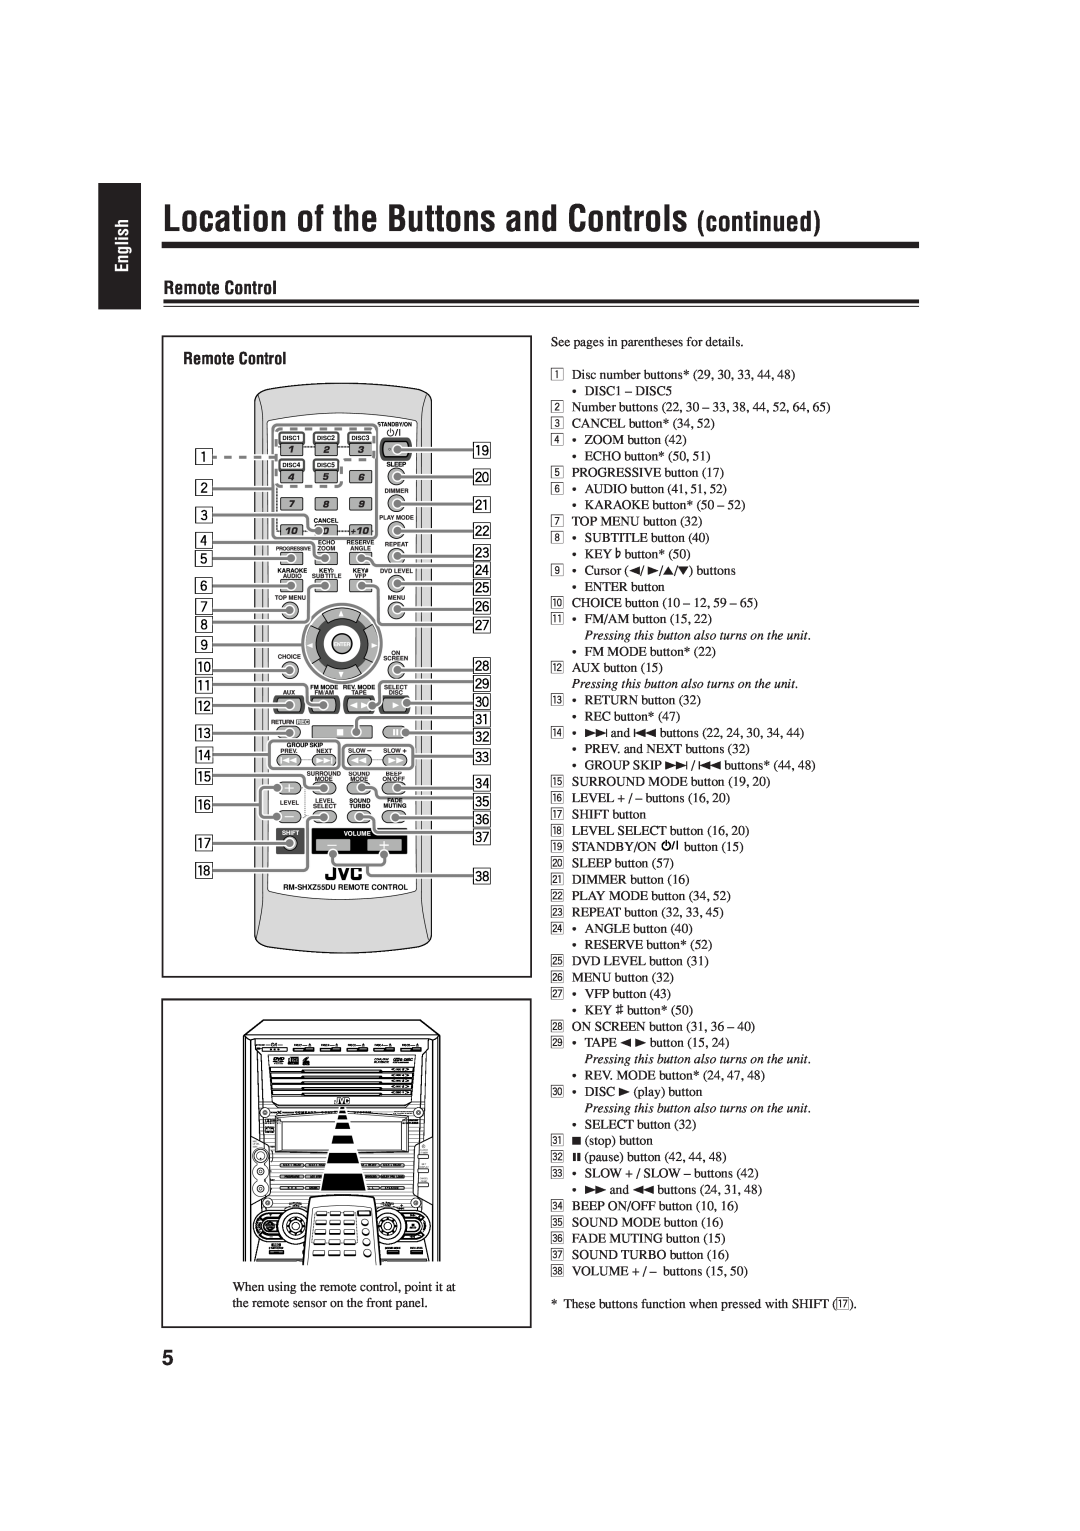 JVC CA-HXZ77D, GVT0119-001C, CA-HXZ55D manual Location of the Buttons and Controls continued, Remote Control, English 